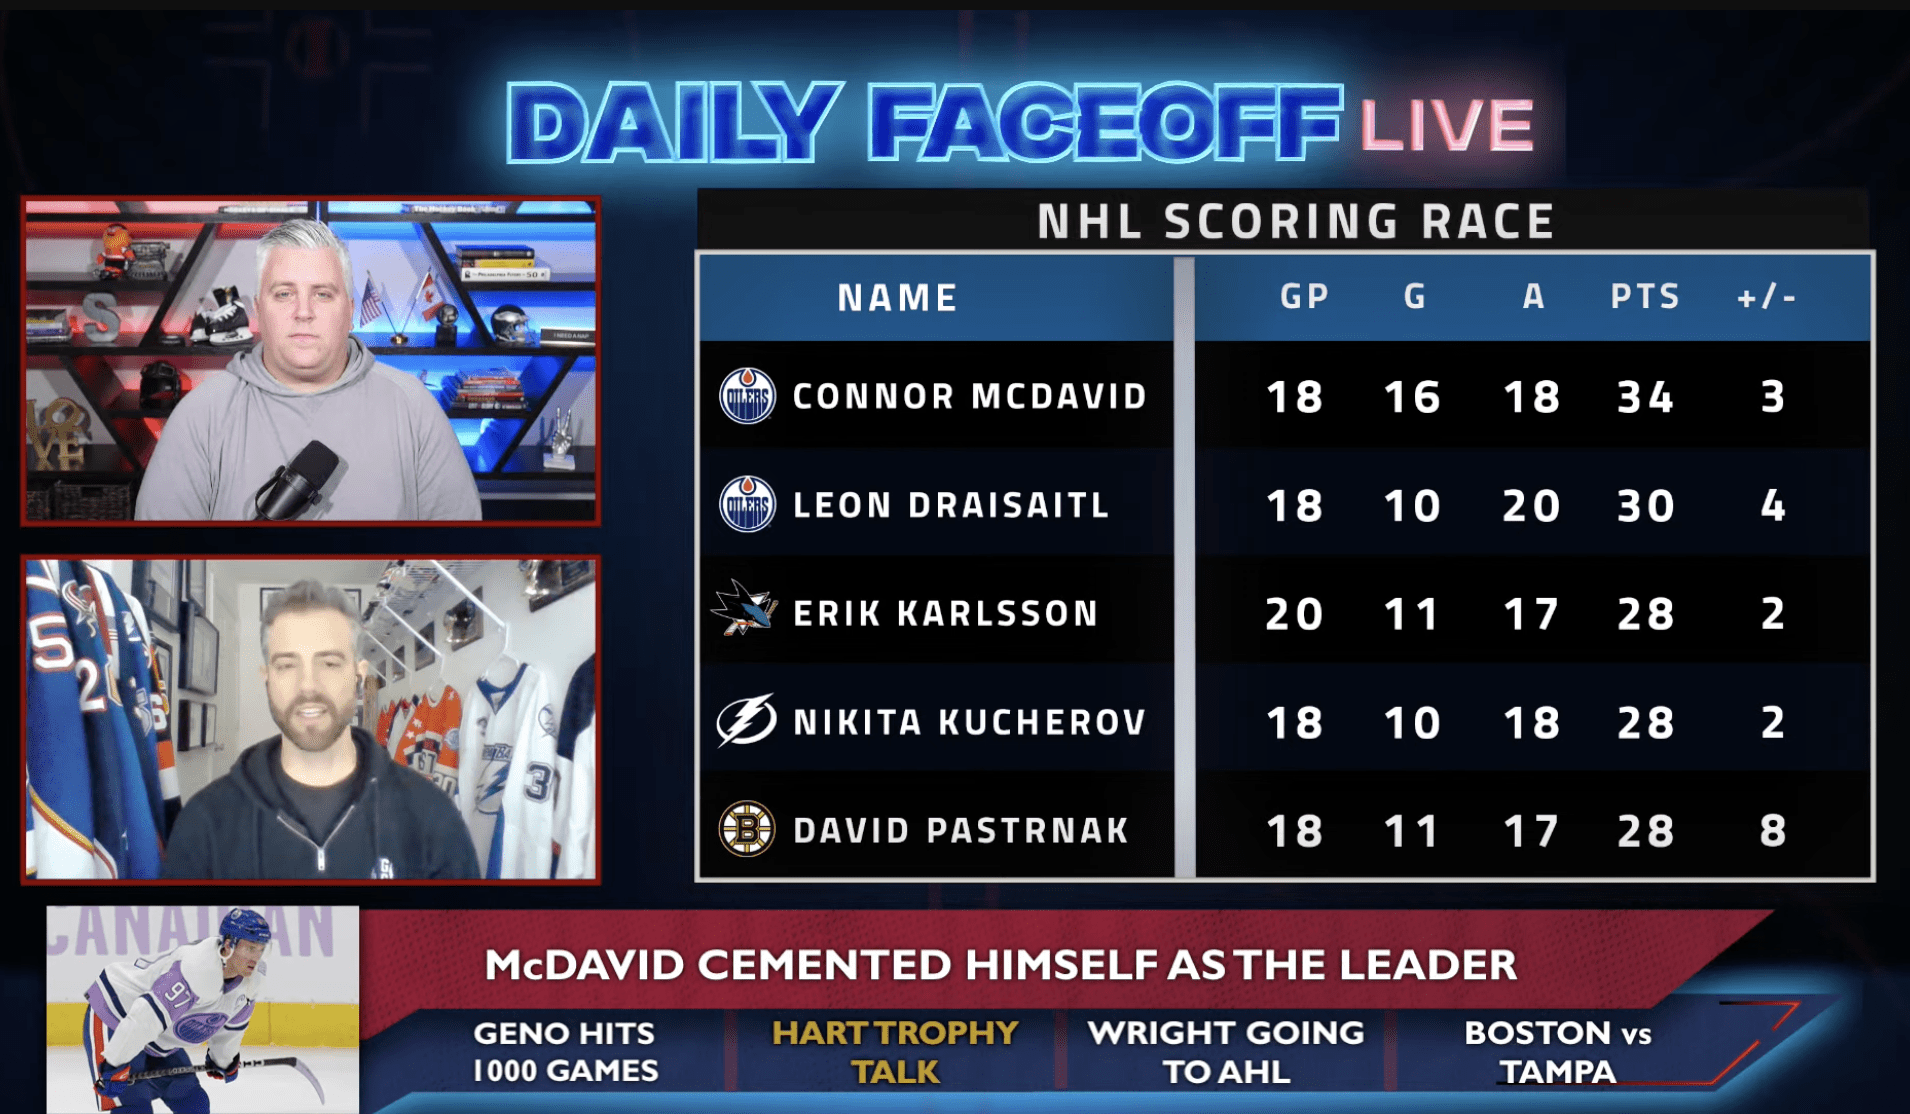 Daily Faceoff Live: If Connor McDavid runs away with the Hart Trophy, who would be second on the ballot?